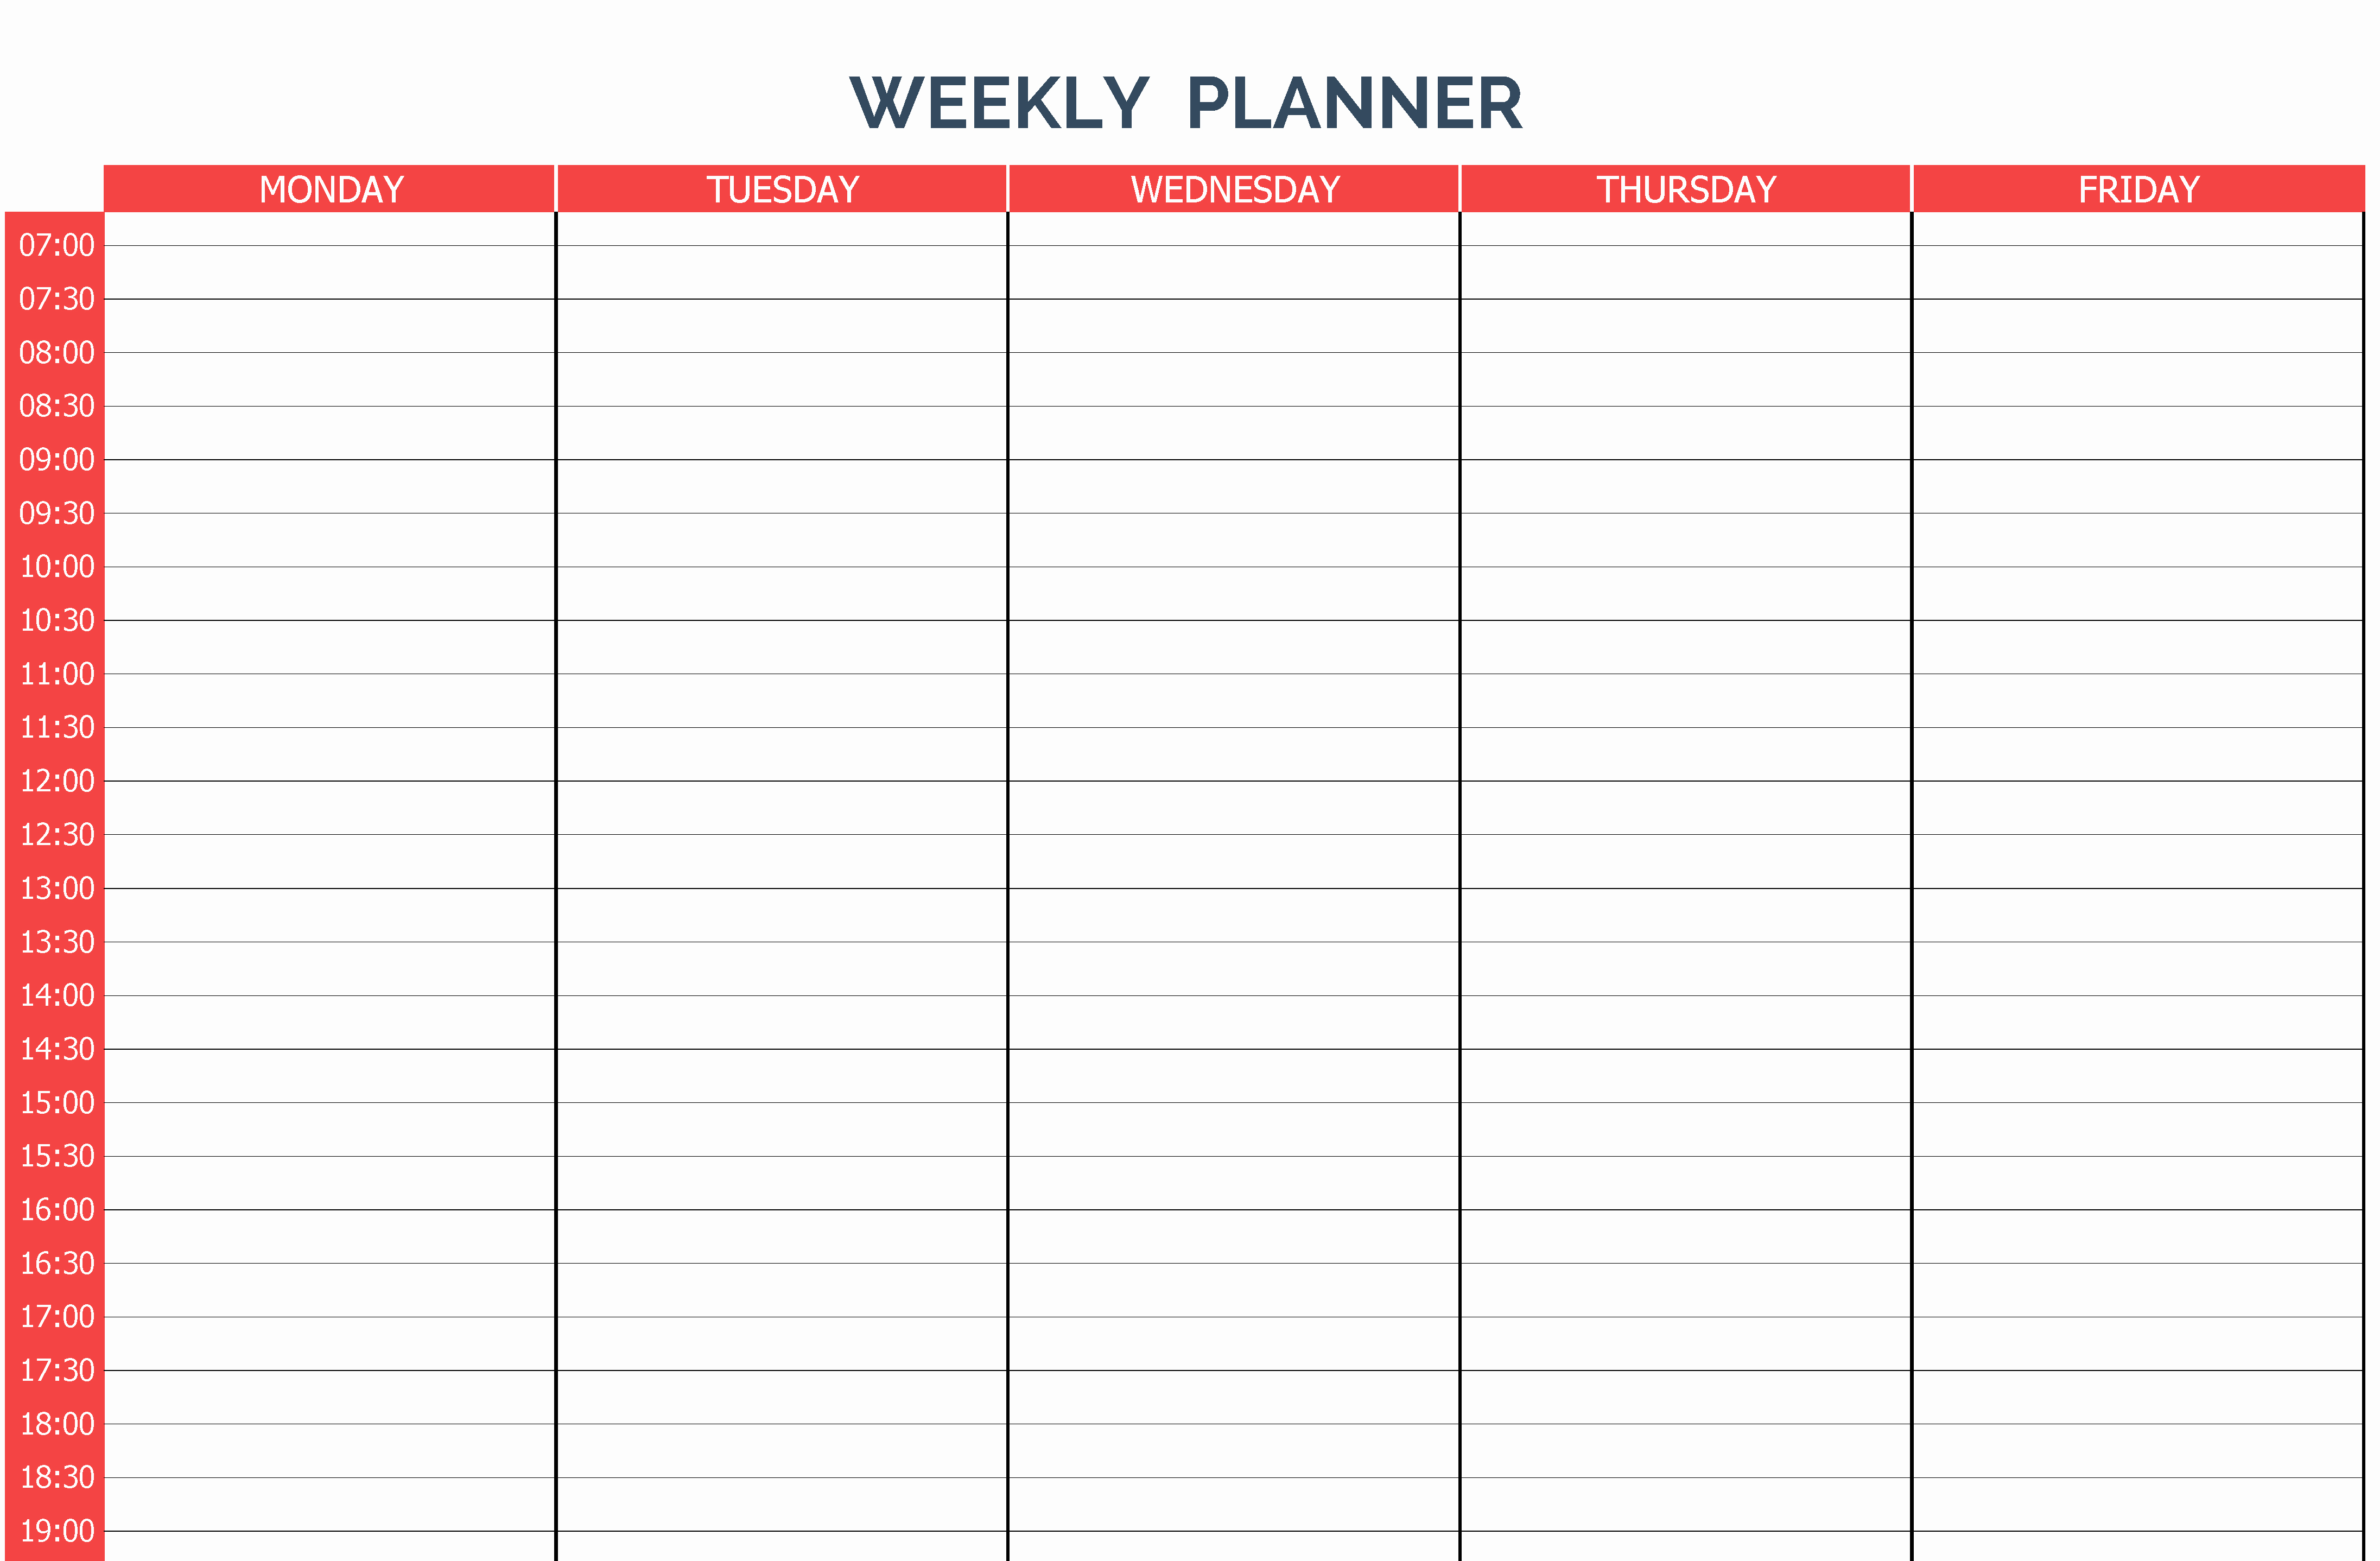 Weekly Planner Template Pdf Unique 10 Weekly Planner Templates Word Excel Pdf formats